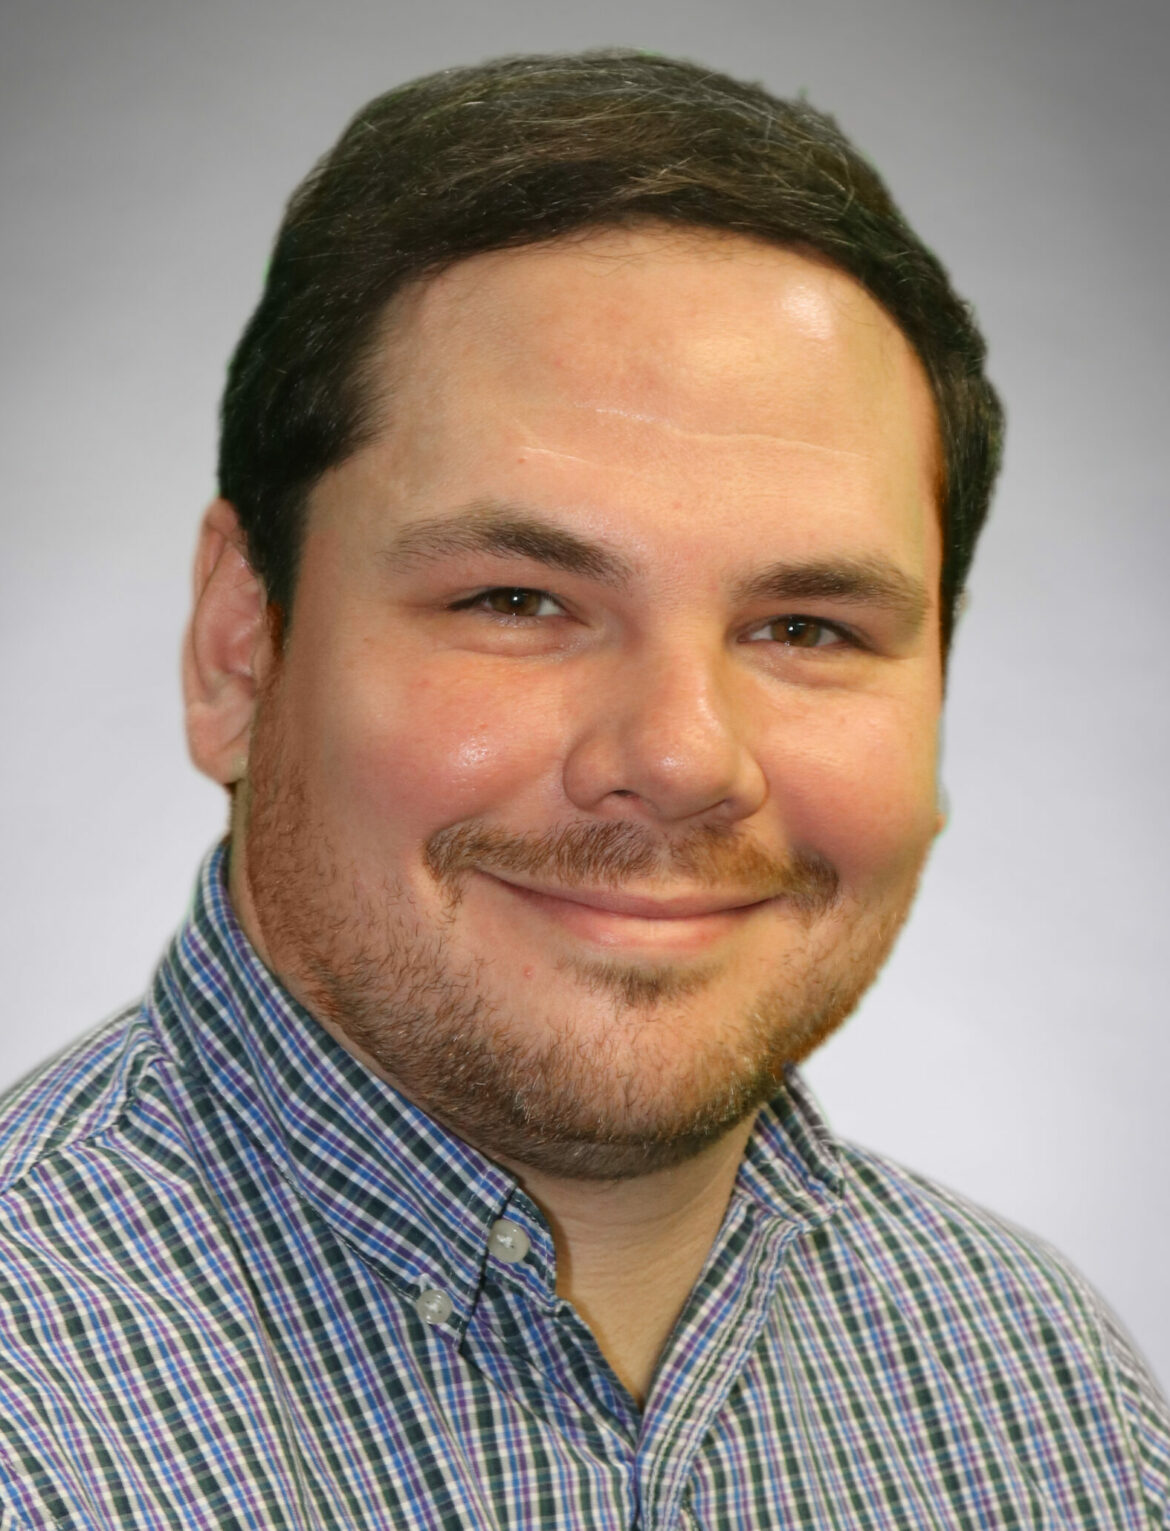 The City of Hilliard has hired Nicholas Vandia as a Transportation Asset Manager in the Transportation and Mobility Department.